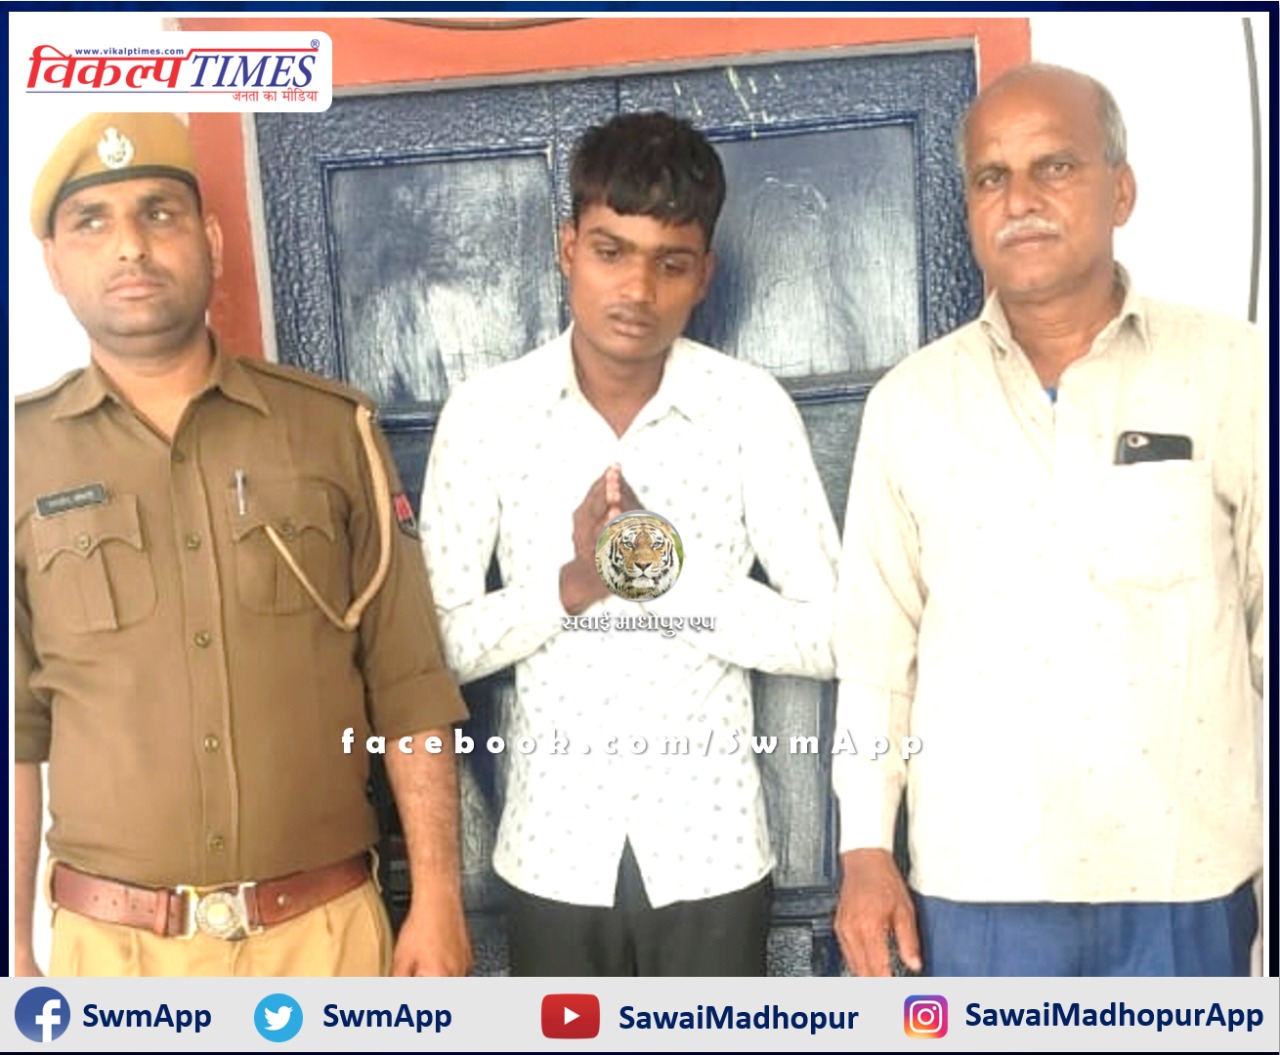 Police arrested accused of theft in rameshwar Dham and Ganga Mata temple in sawai madhopur